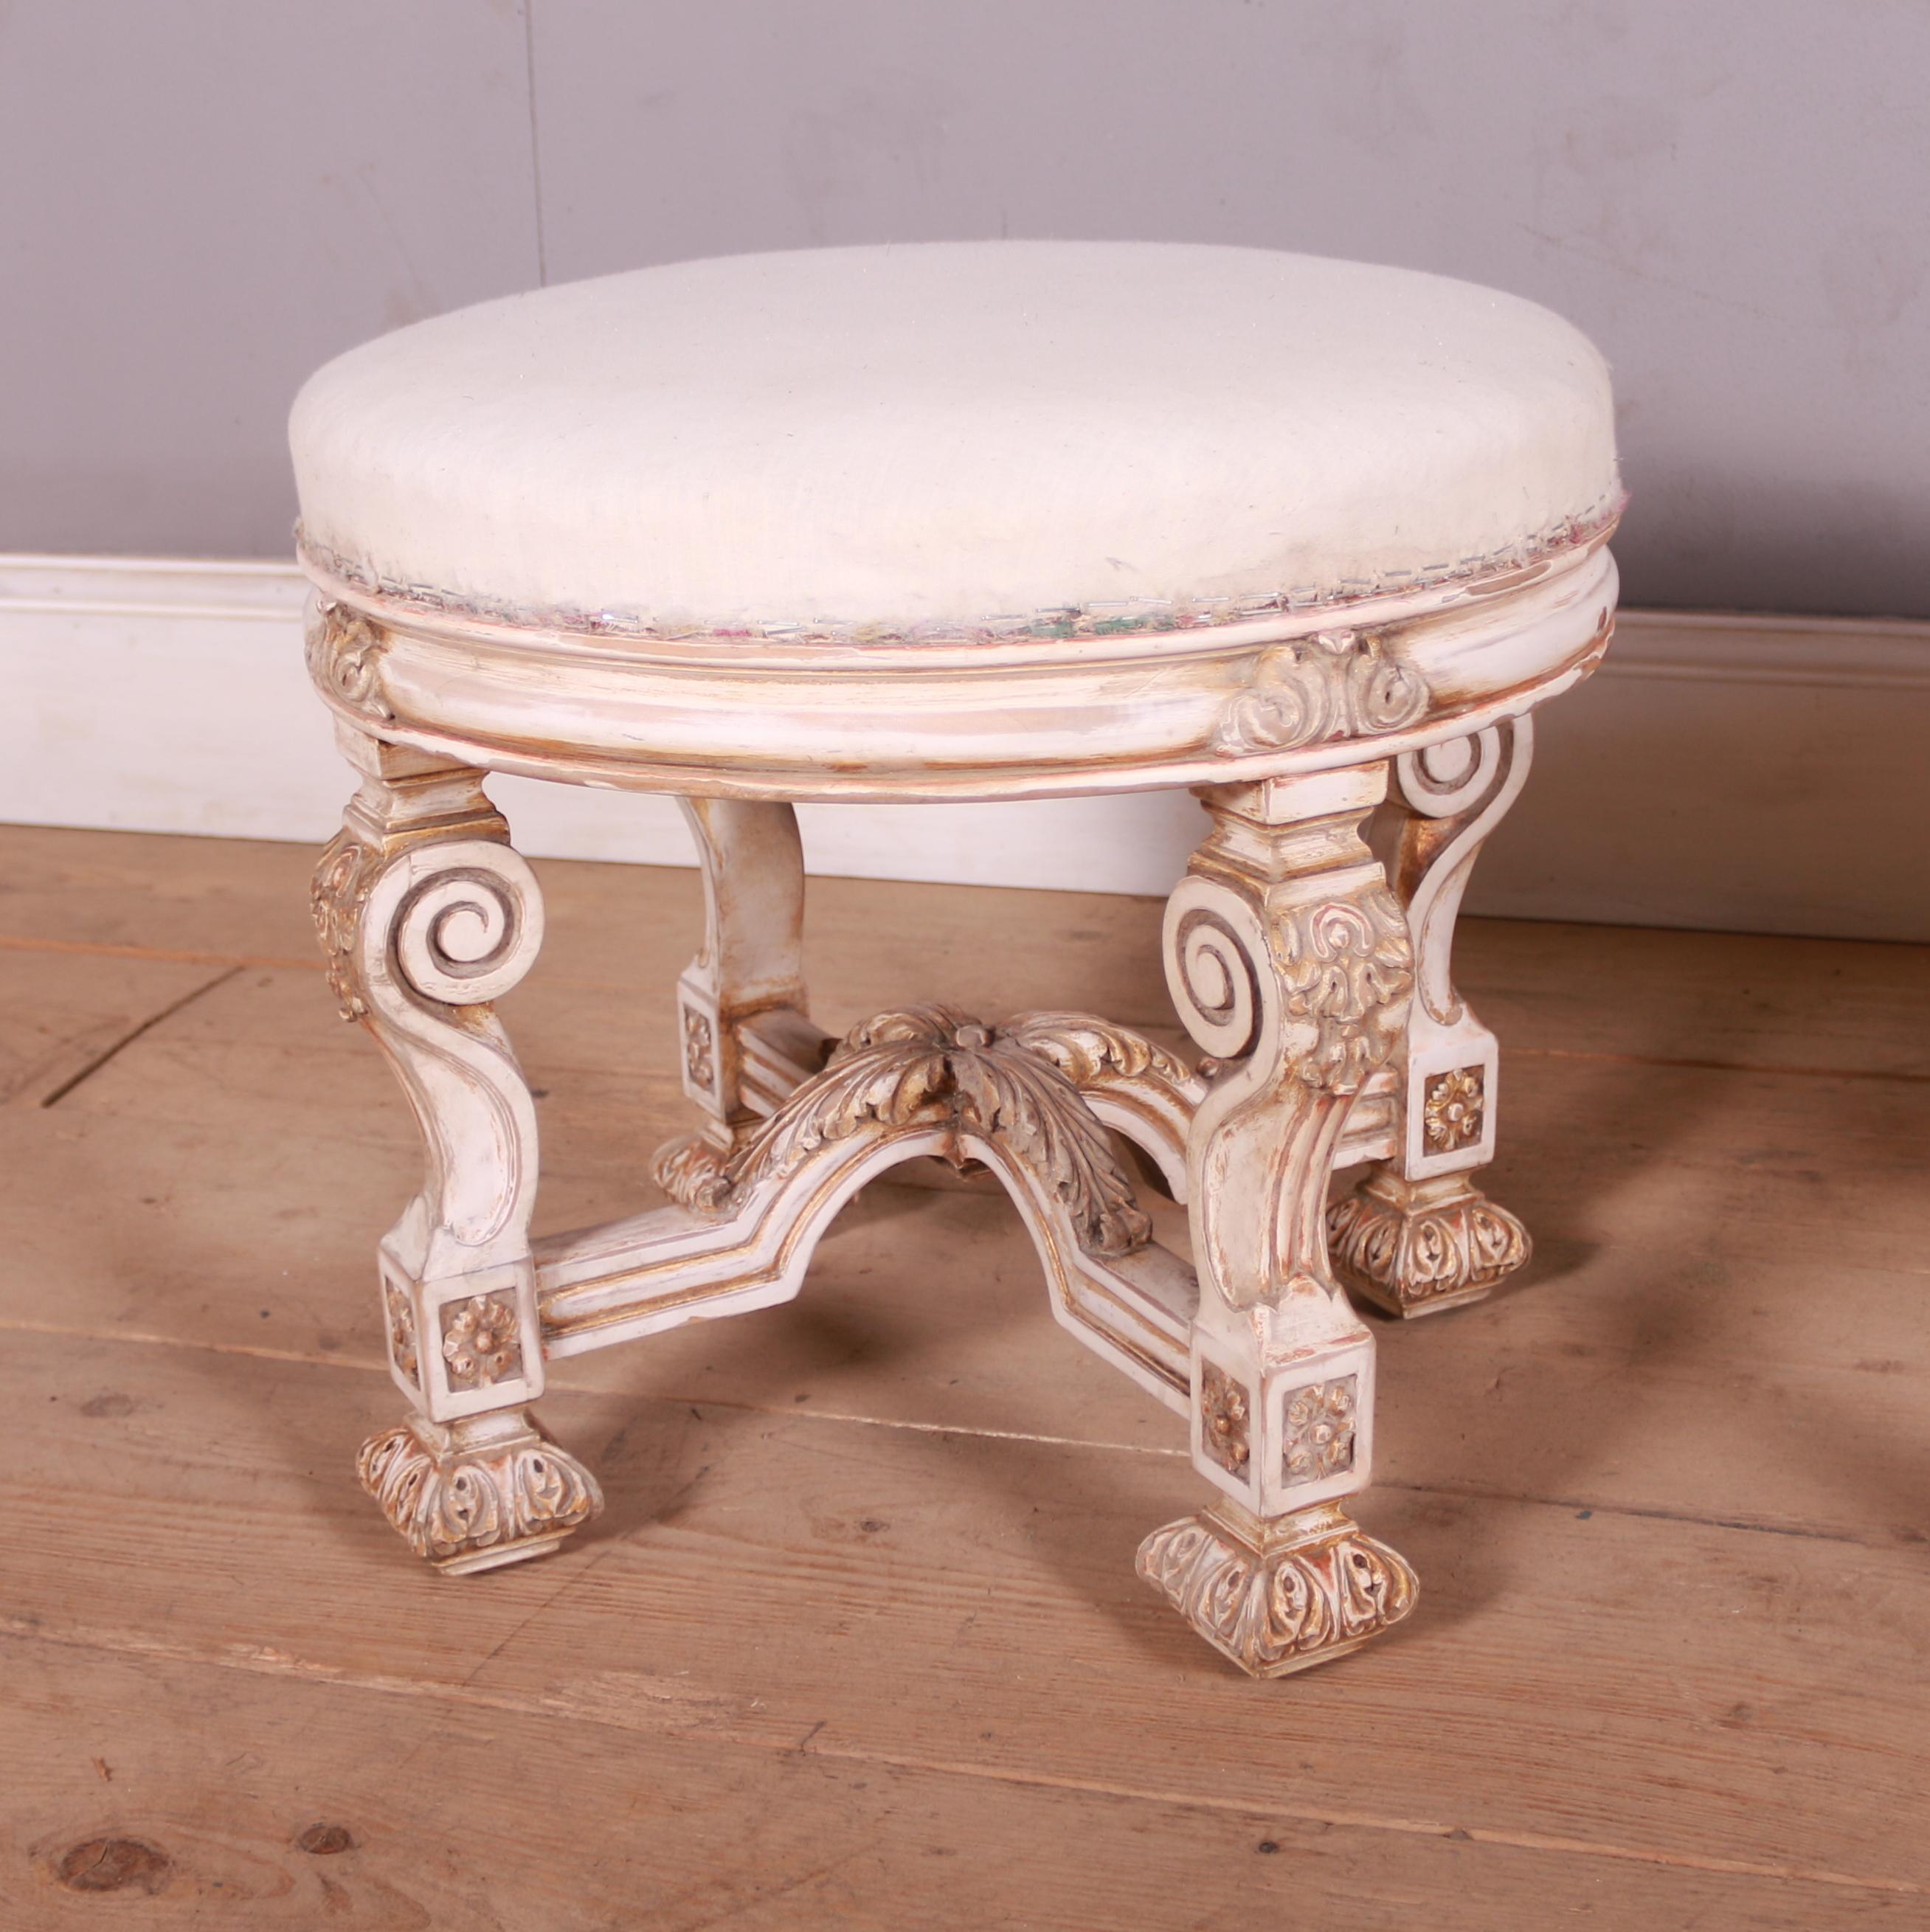 Good pair of 19th C Swedish stools with original paint finish and traces of gilt. 1890.

Reference: 7426

Dimensions
17 inches (43 cms) high
18.5 inches (47 cms) diameter.